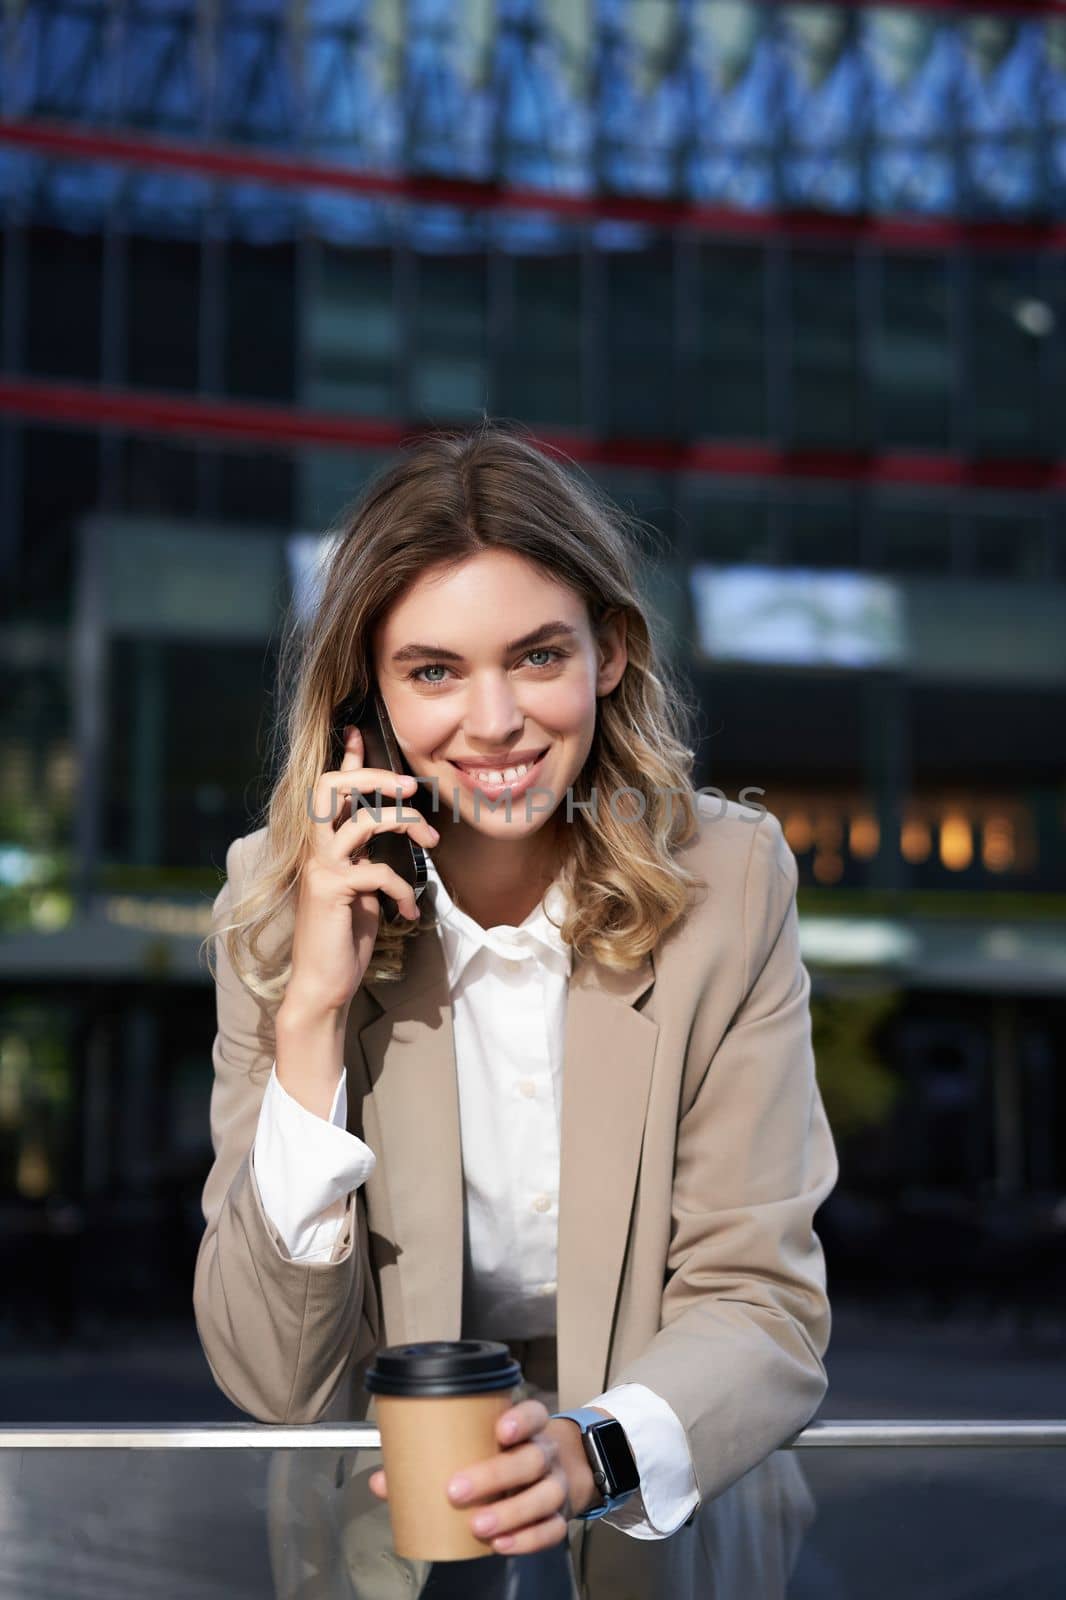 Vertical shot of smiling businesswoman answer mobile phone call, talking on smartphone and drinking coffee.